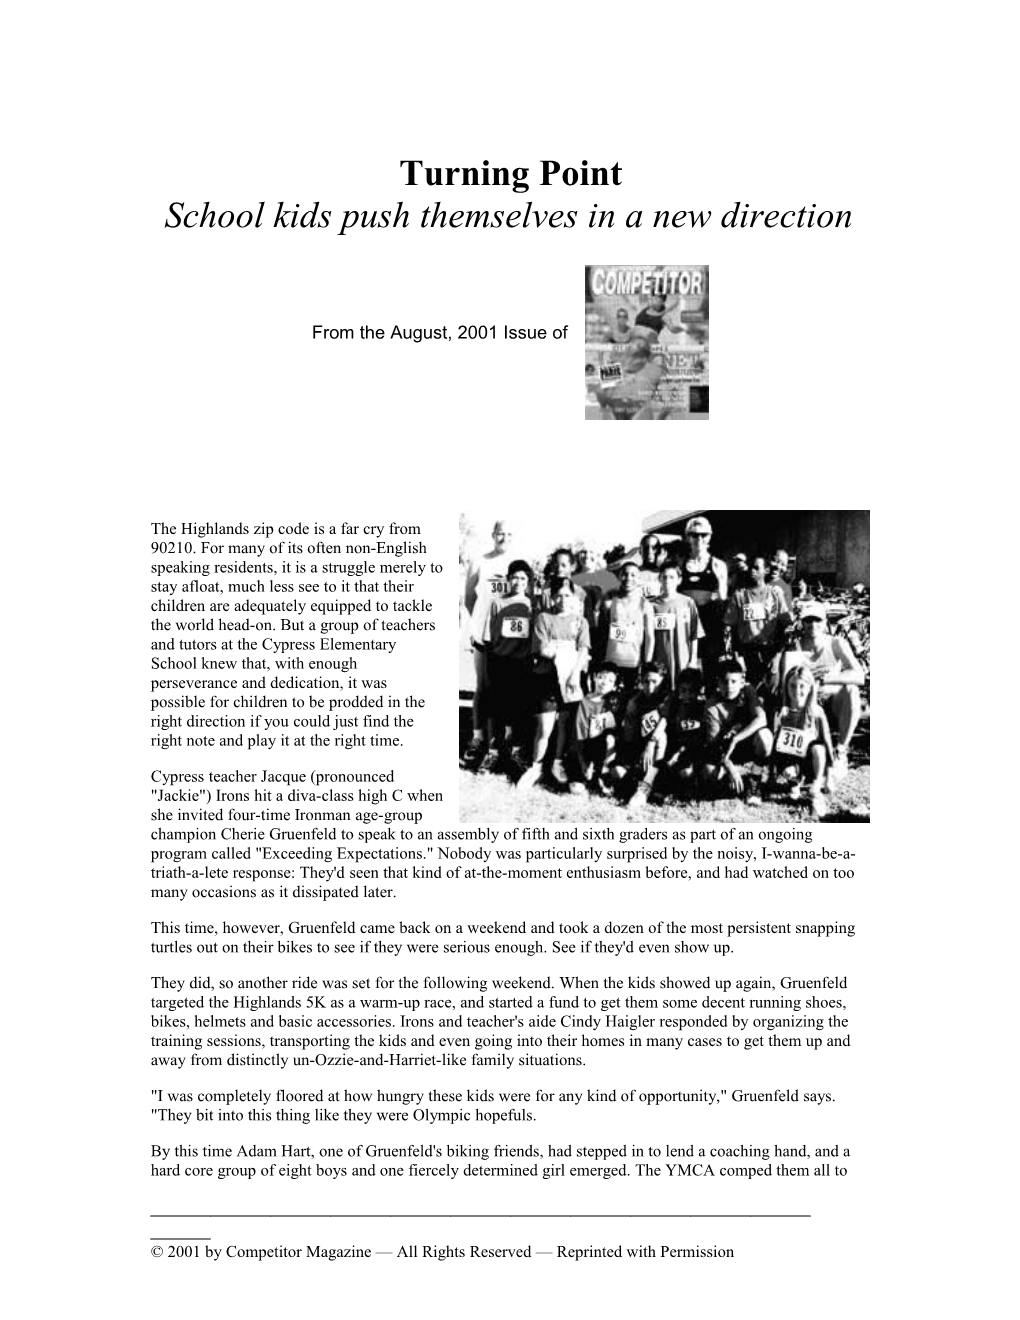 Turning Point - School Kids Push Themselves in a New Direction